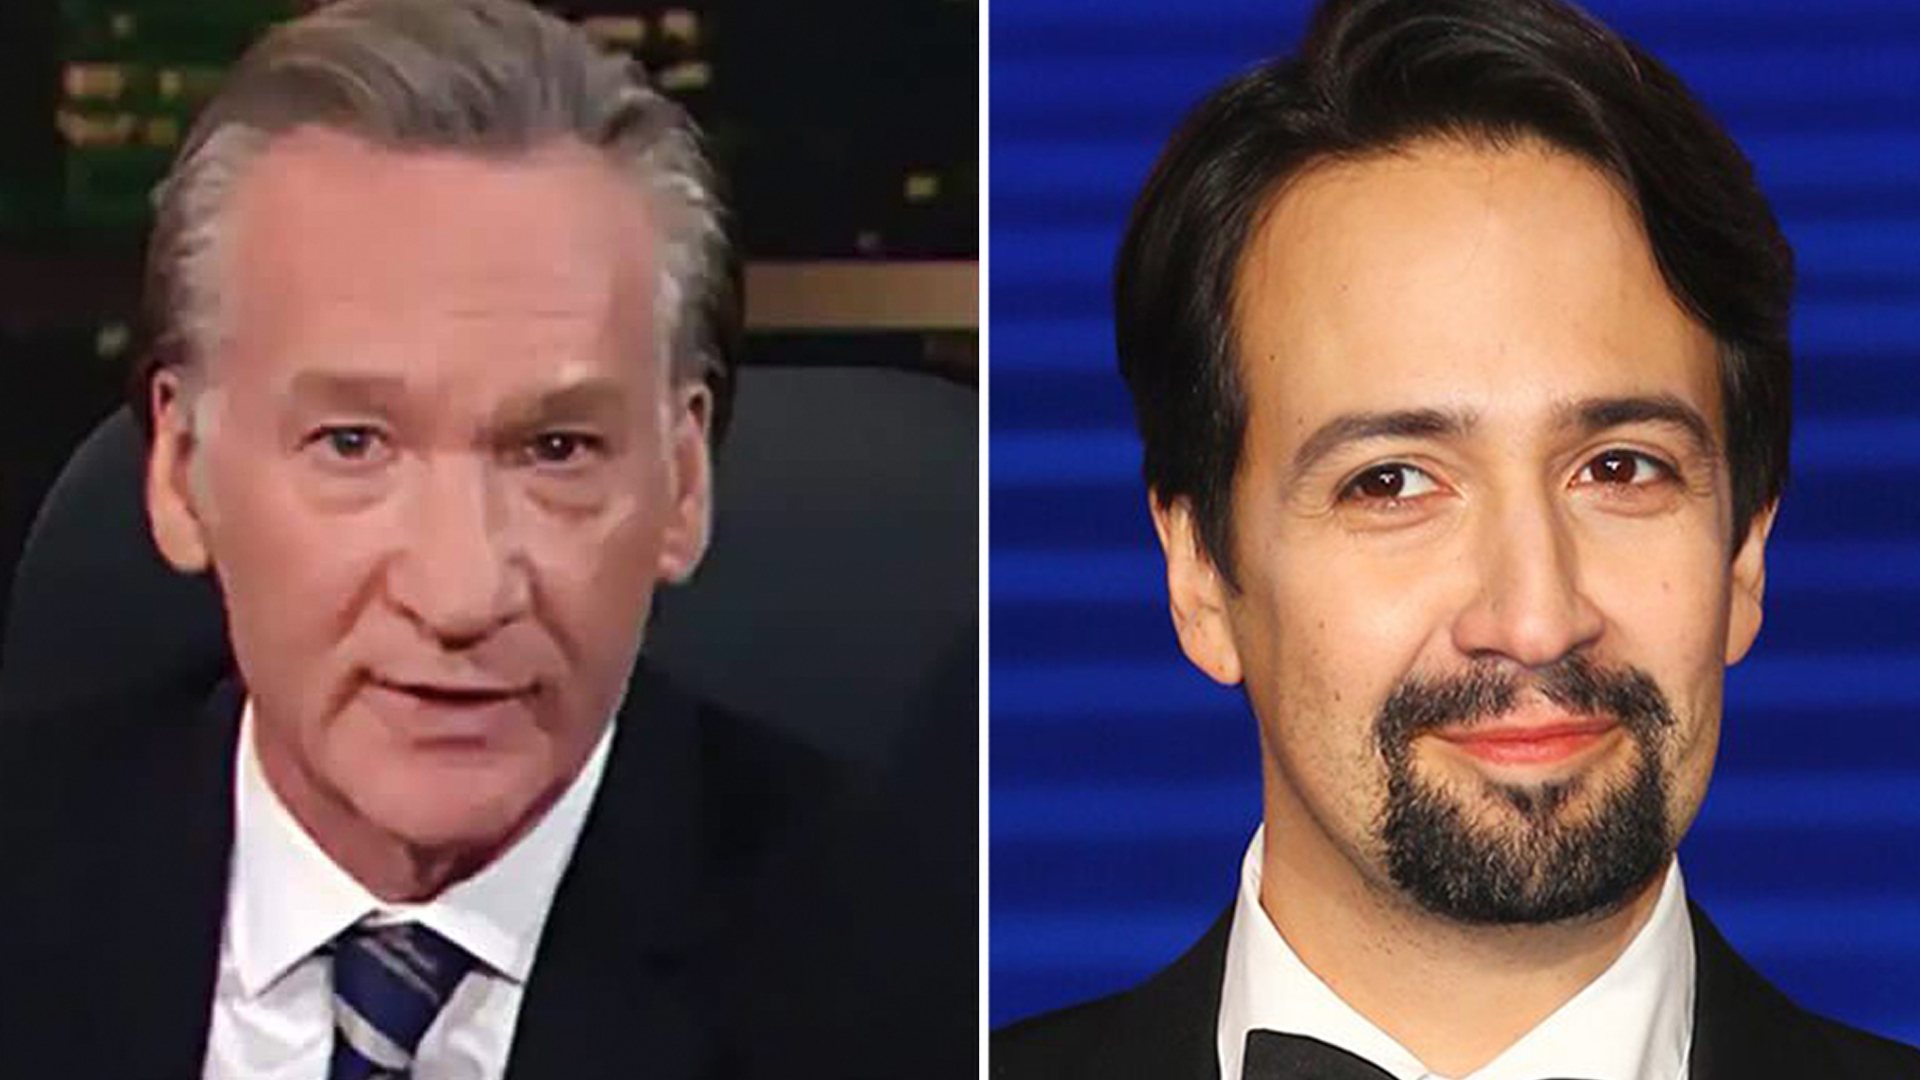 Bill Maher rips Lin-Manuel Miranda for ‘In the Heights’ diversity apology: ‘This is why people hate Democrats’